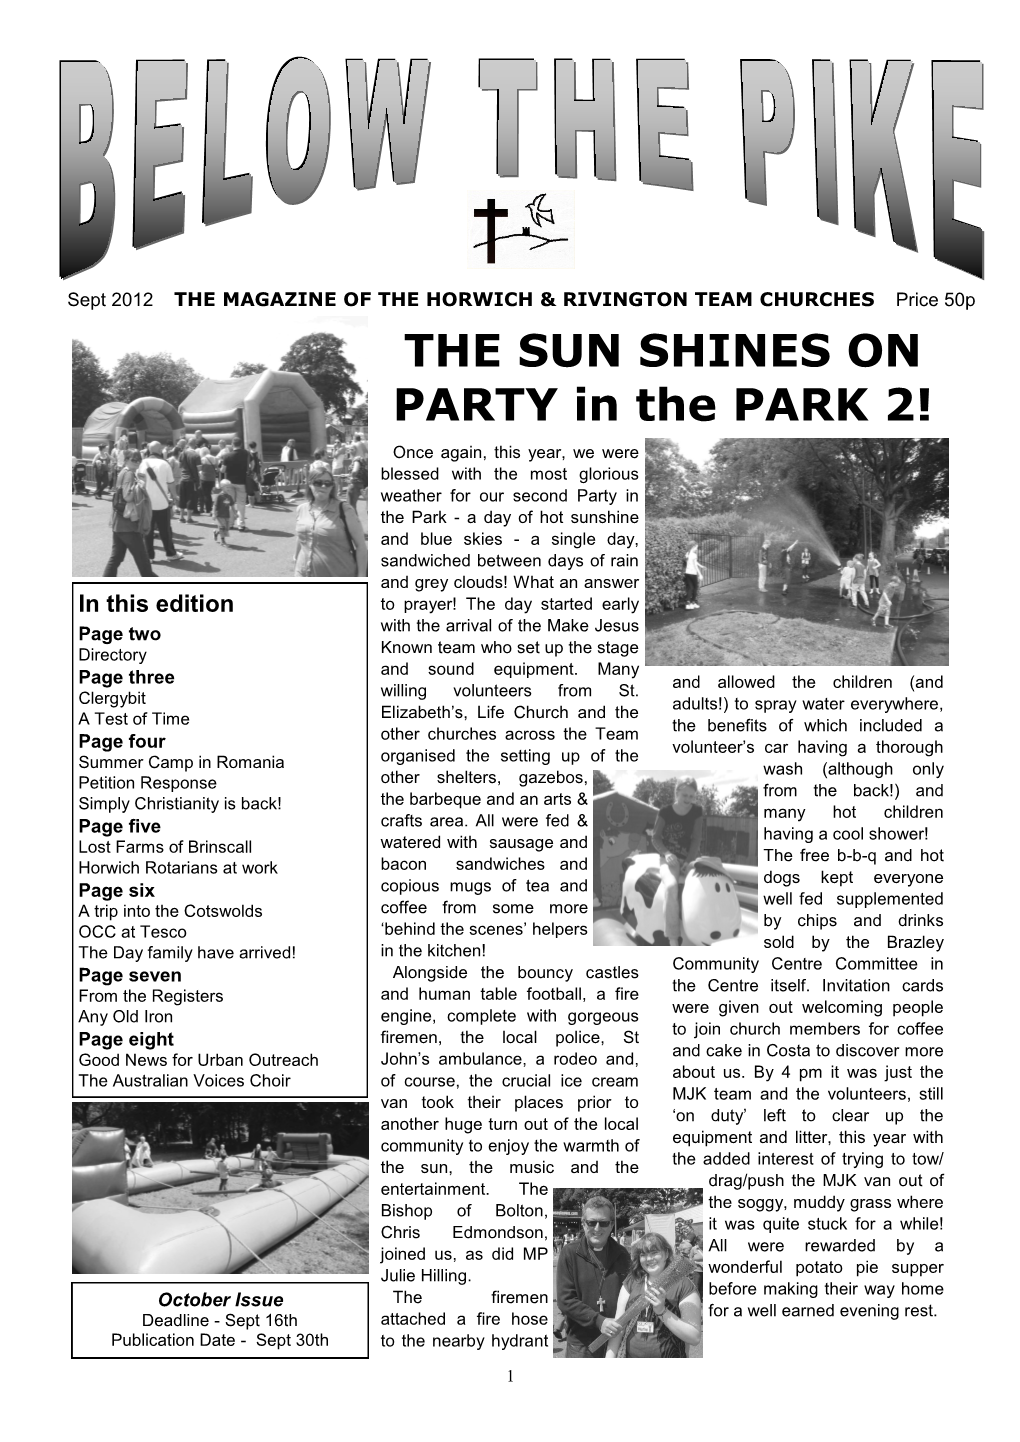 THE SUN SHINES on PARTY in the PARK 2!